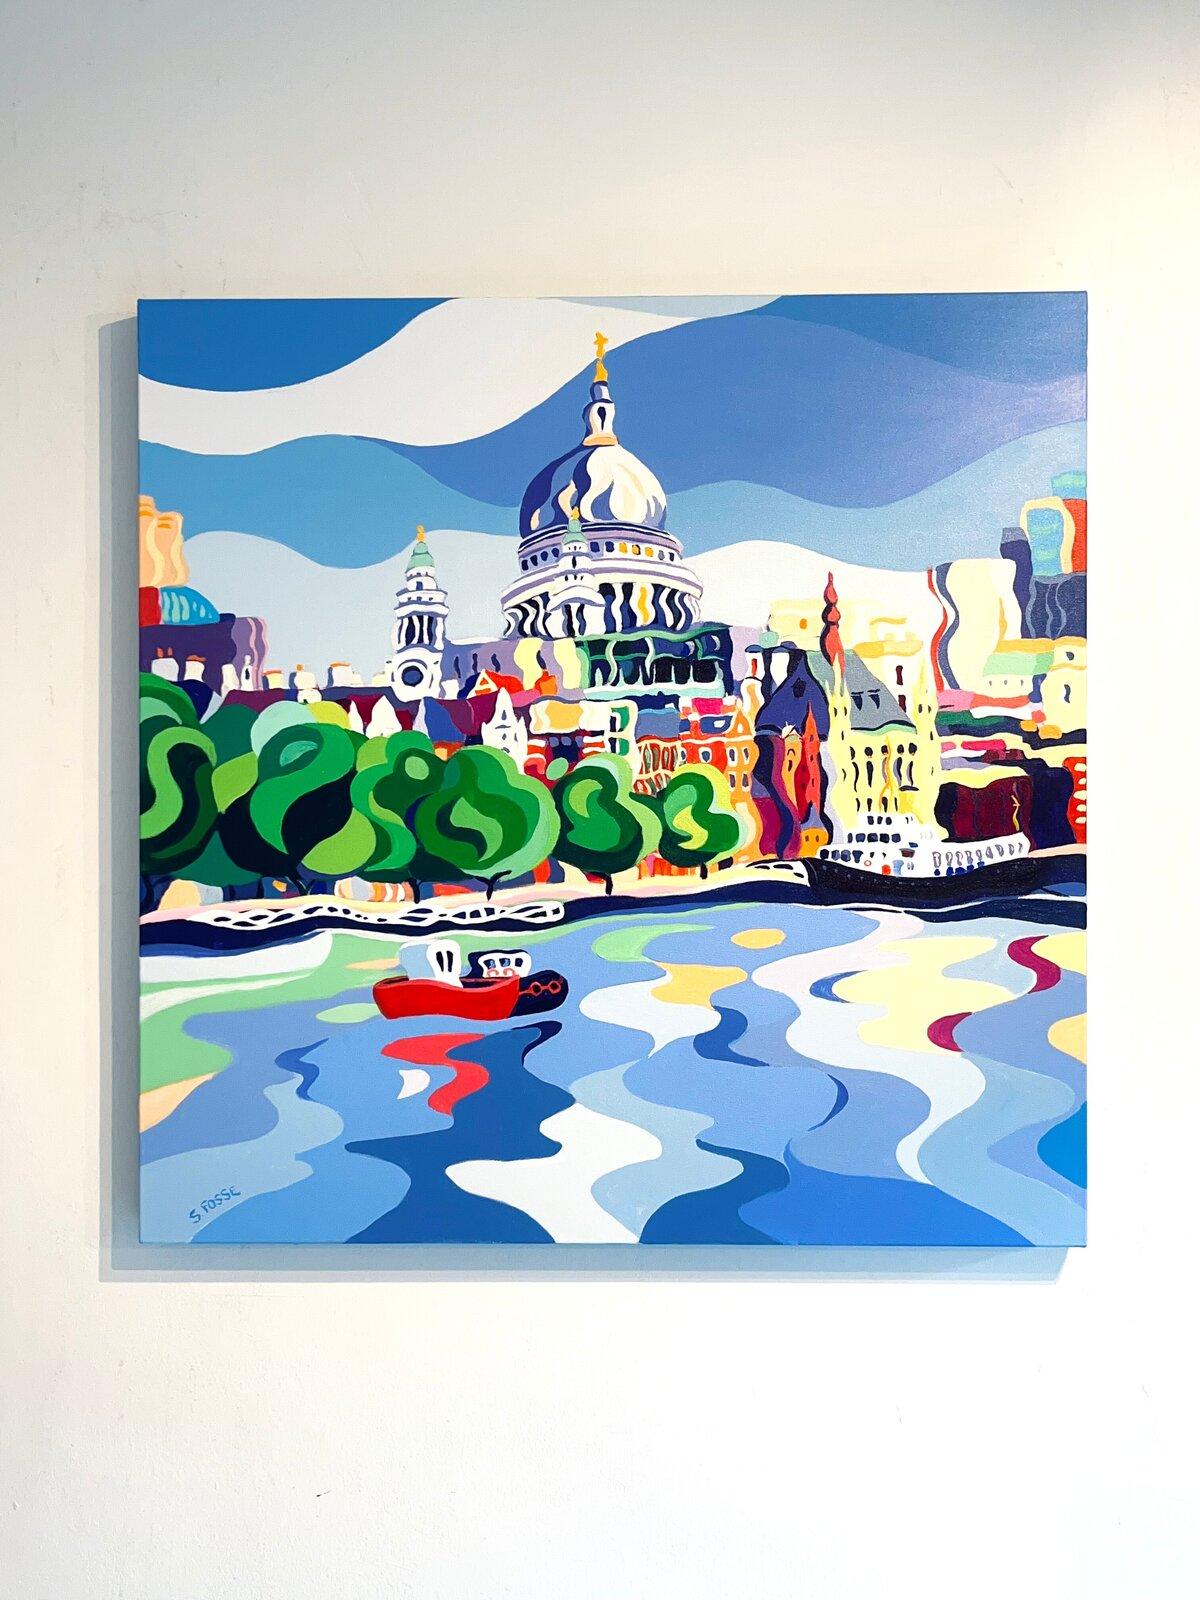 View of St Paul’s-original modern realism cityscape painting-contemporary art - Painting by Sarah Fosse